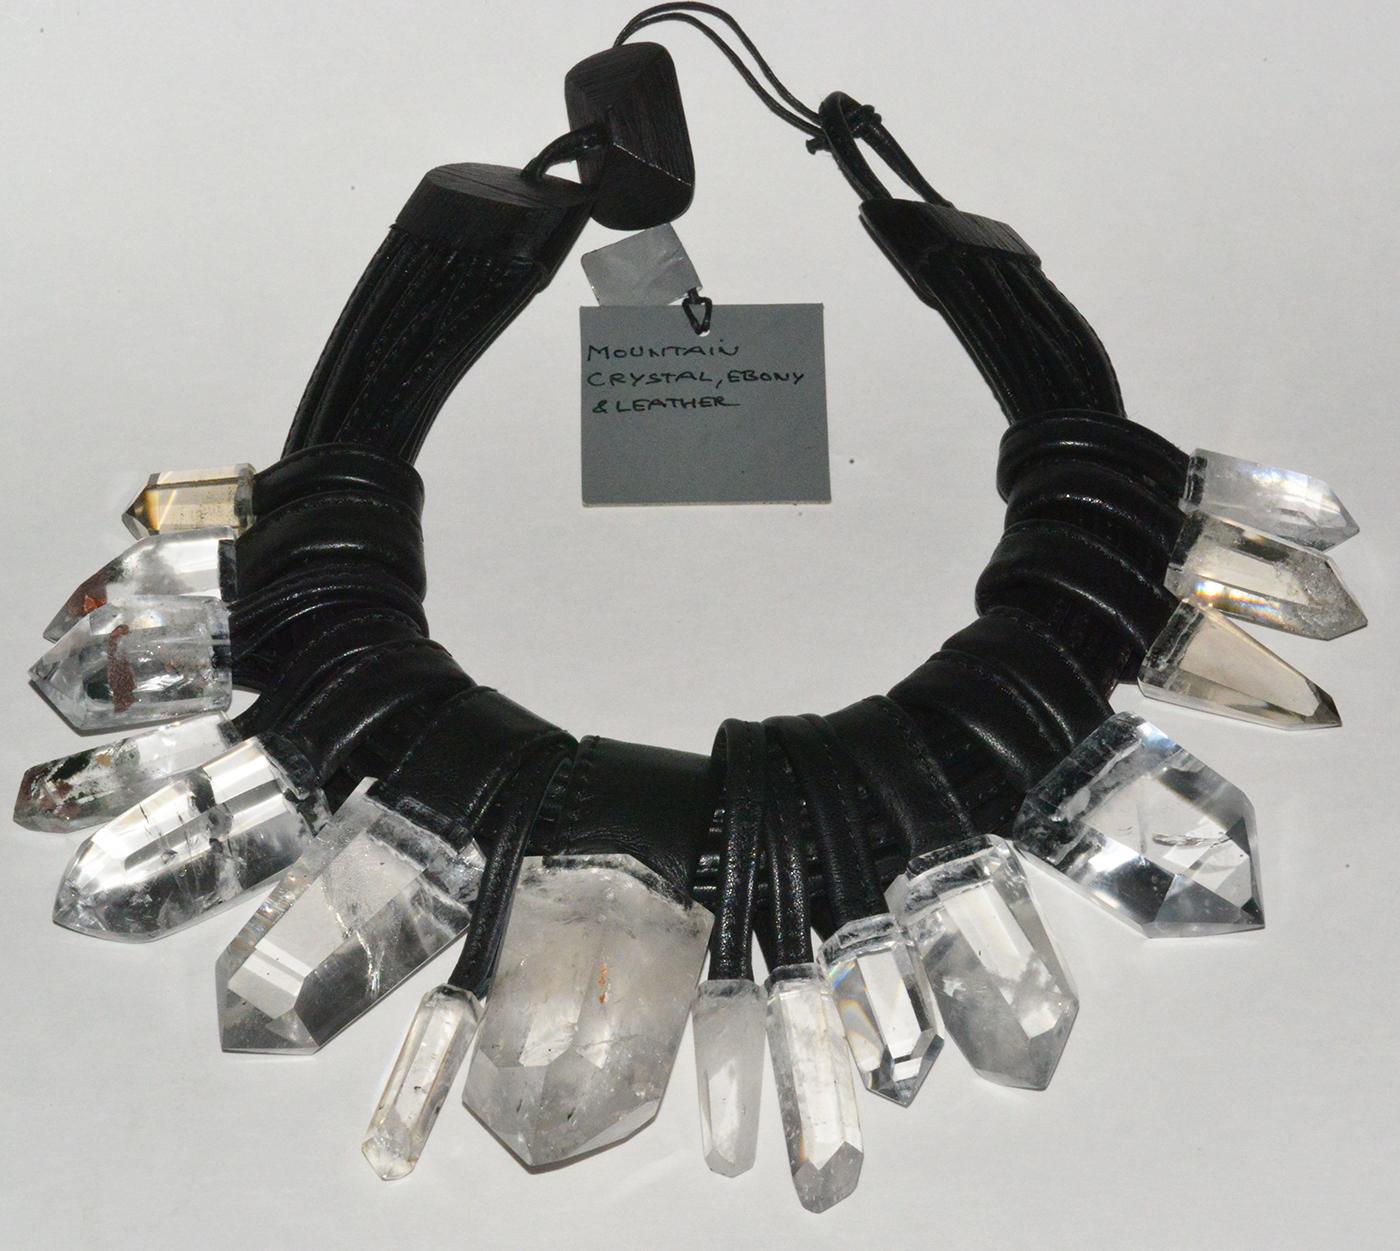 Absolutely amazing!!! One of a Kind, Gerda Lyndgaard Rock Crystal and leather necklace. Not lightweight, but very balanced on. This is wearable art at its finest!